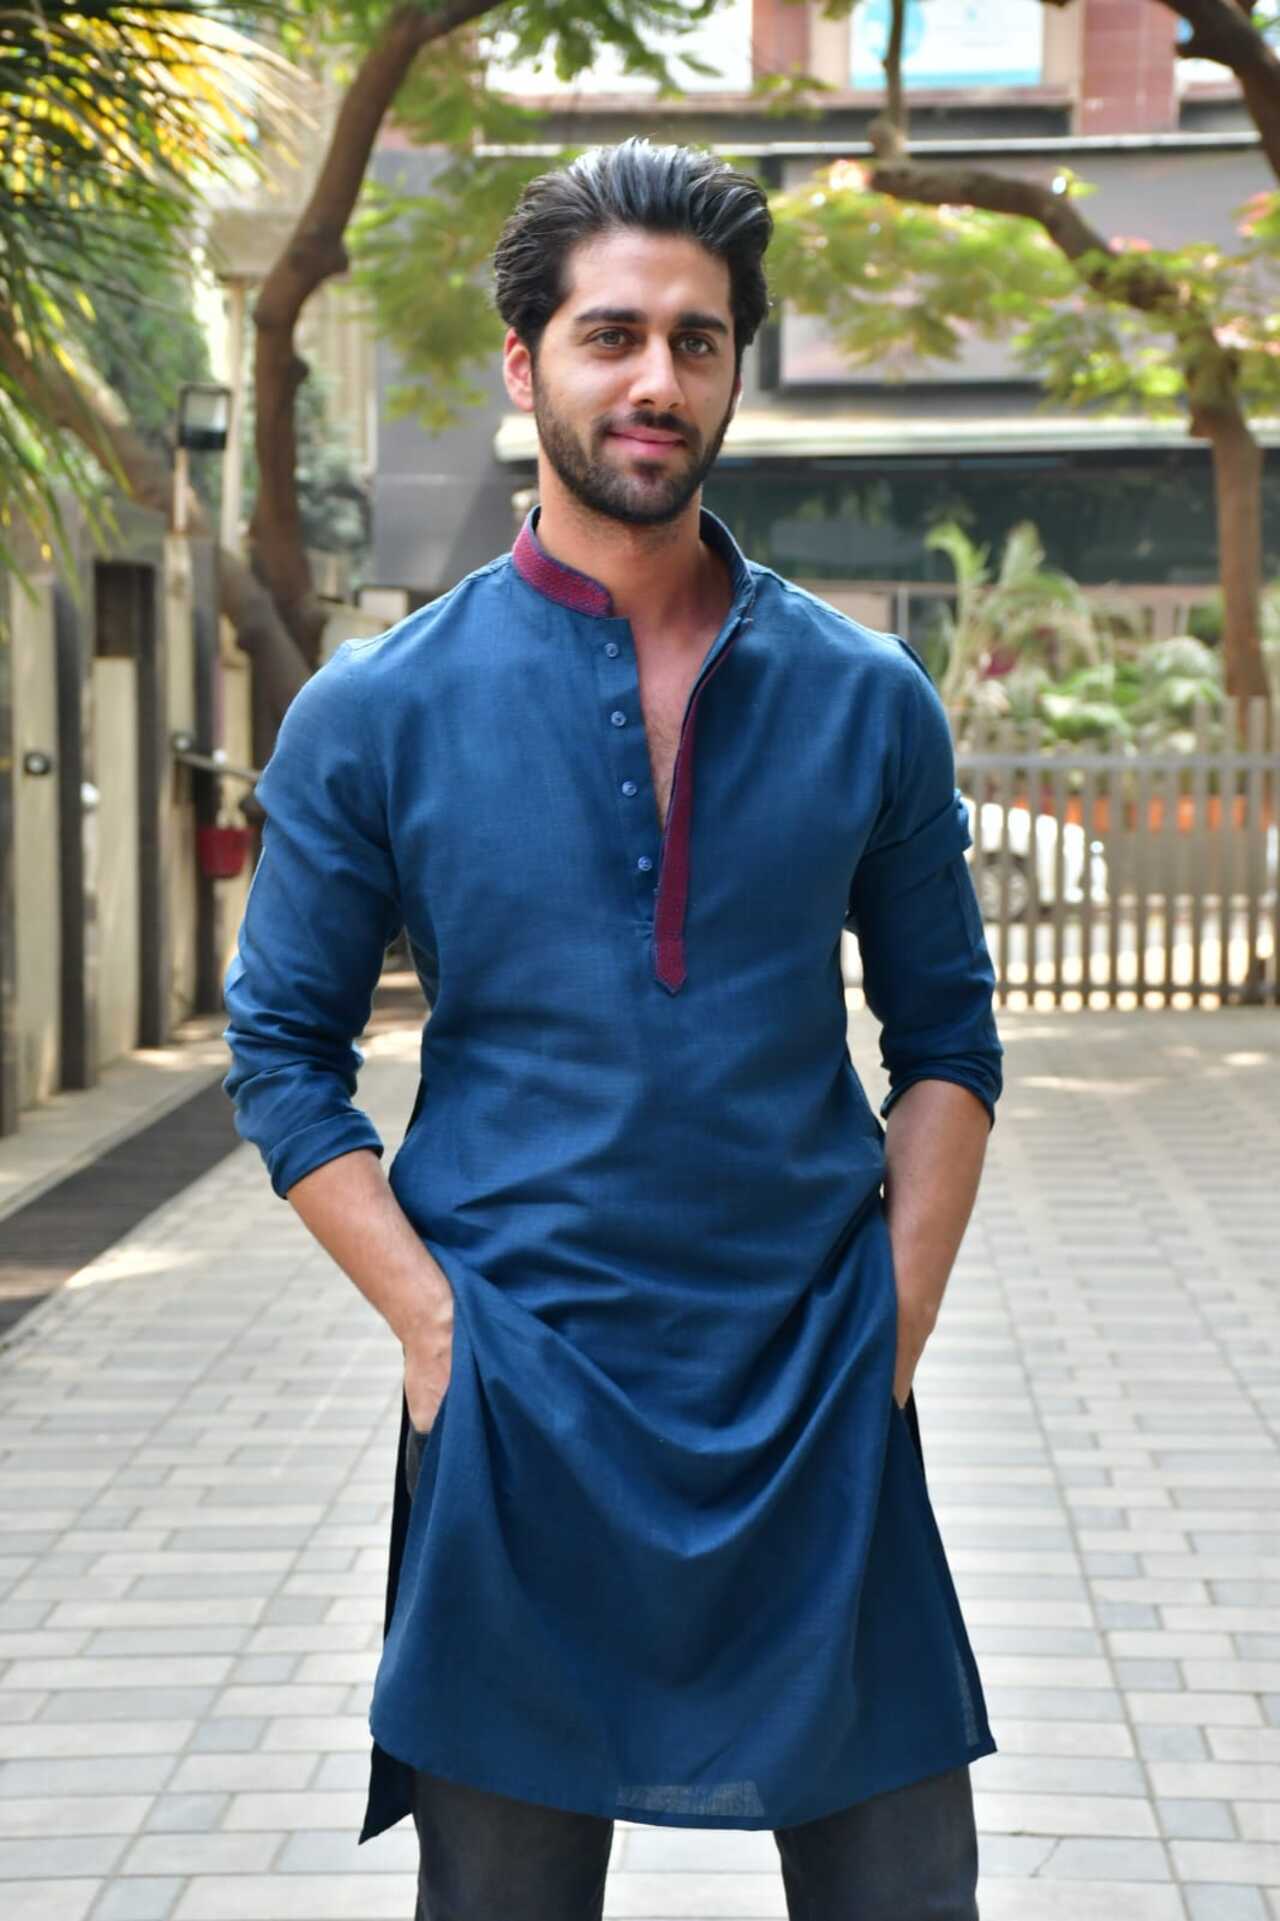 Spotted in the city: Vicky Kaushal jets off to promote Sam Bahadur ...